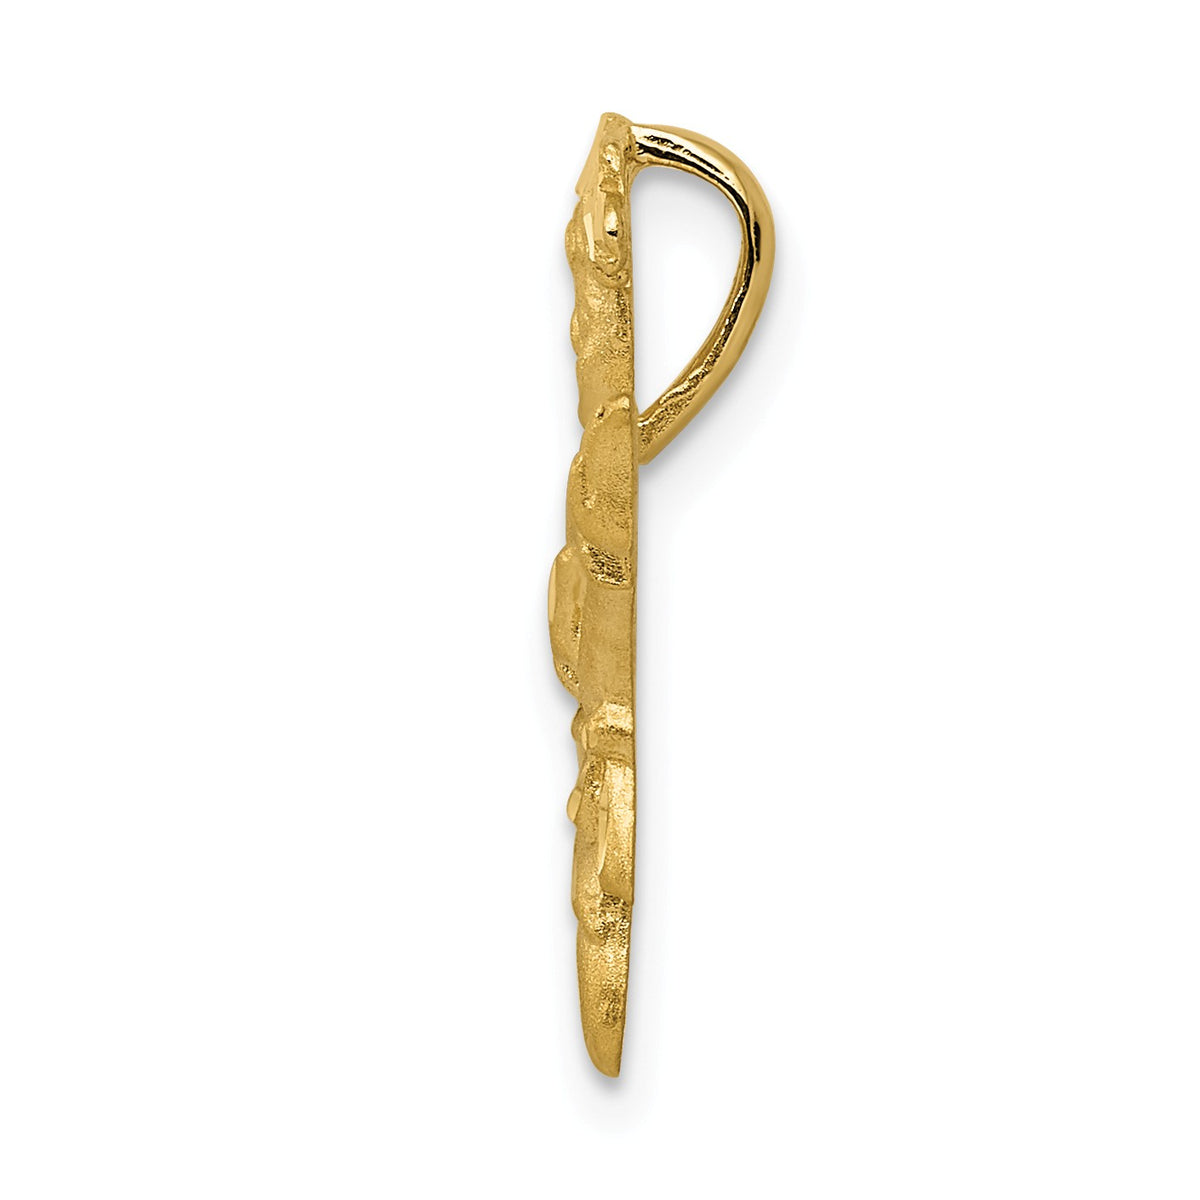 Alternate view of the 14k Yellow Gold Female Karate Kicker Pendant by The Black Bow Jewelry Co.